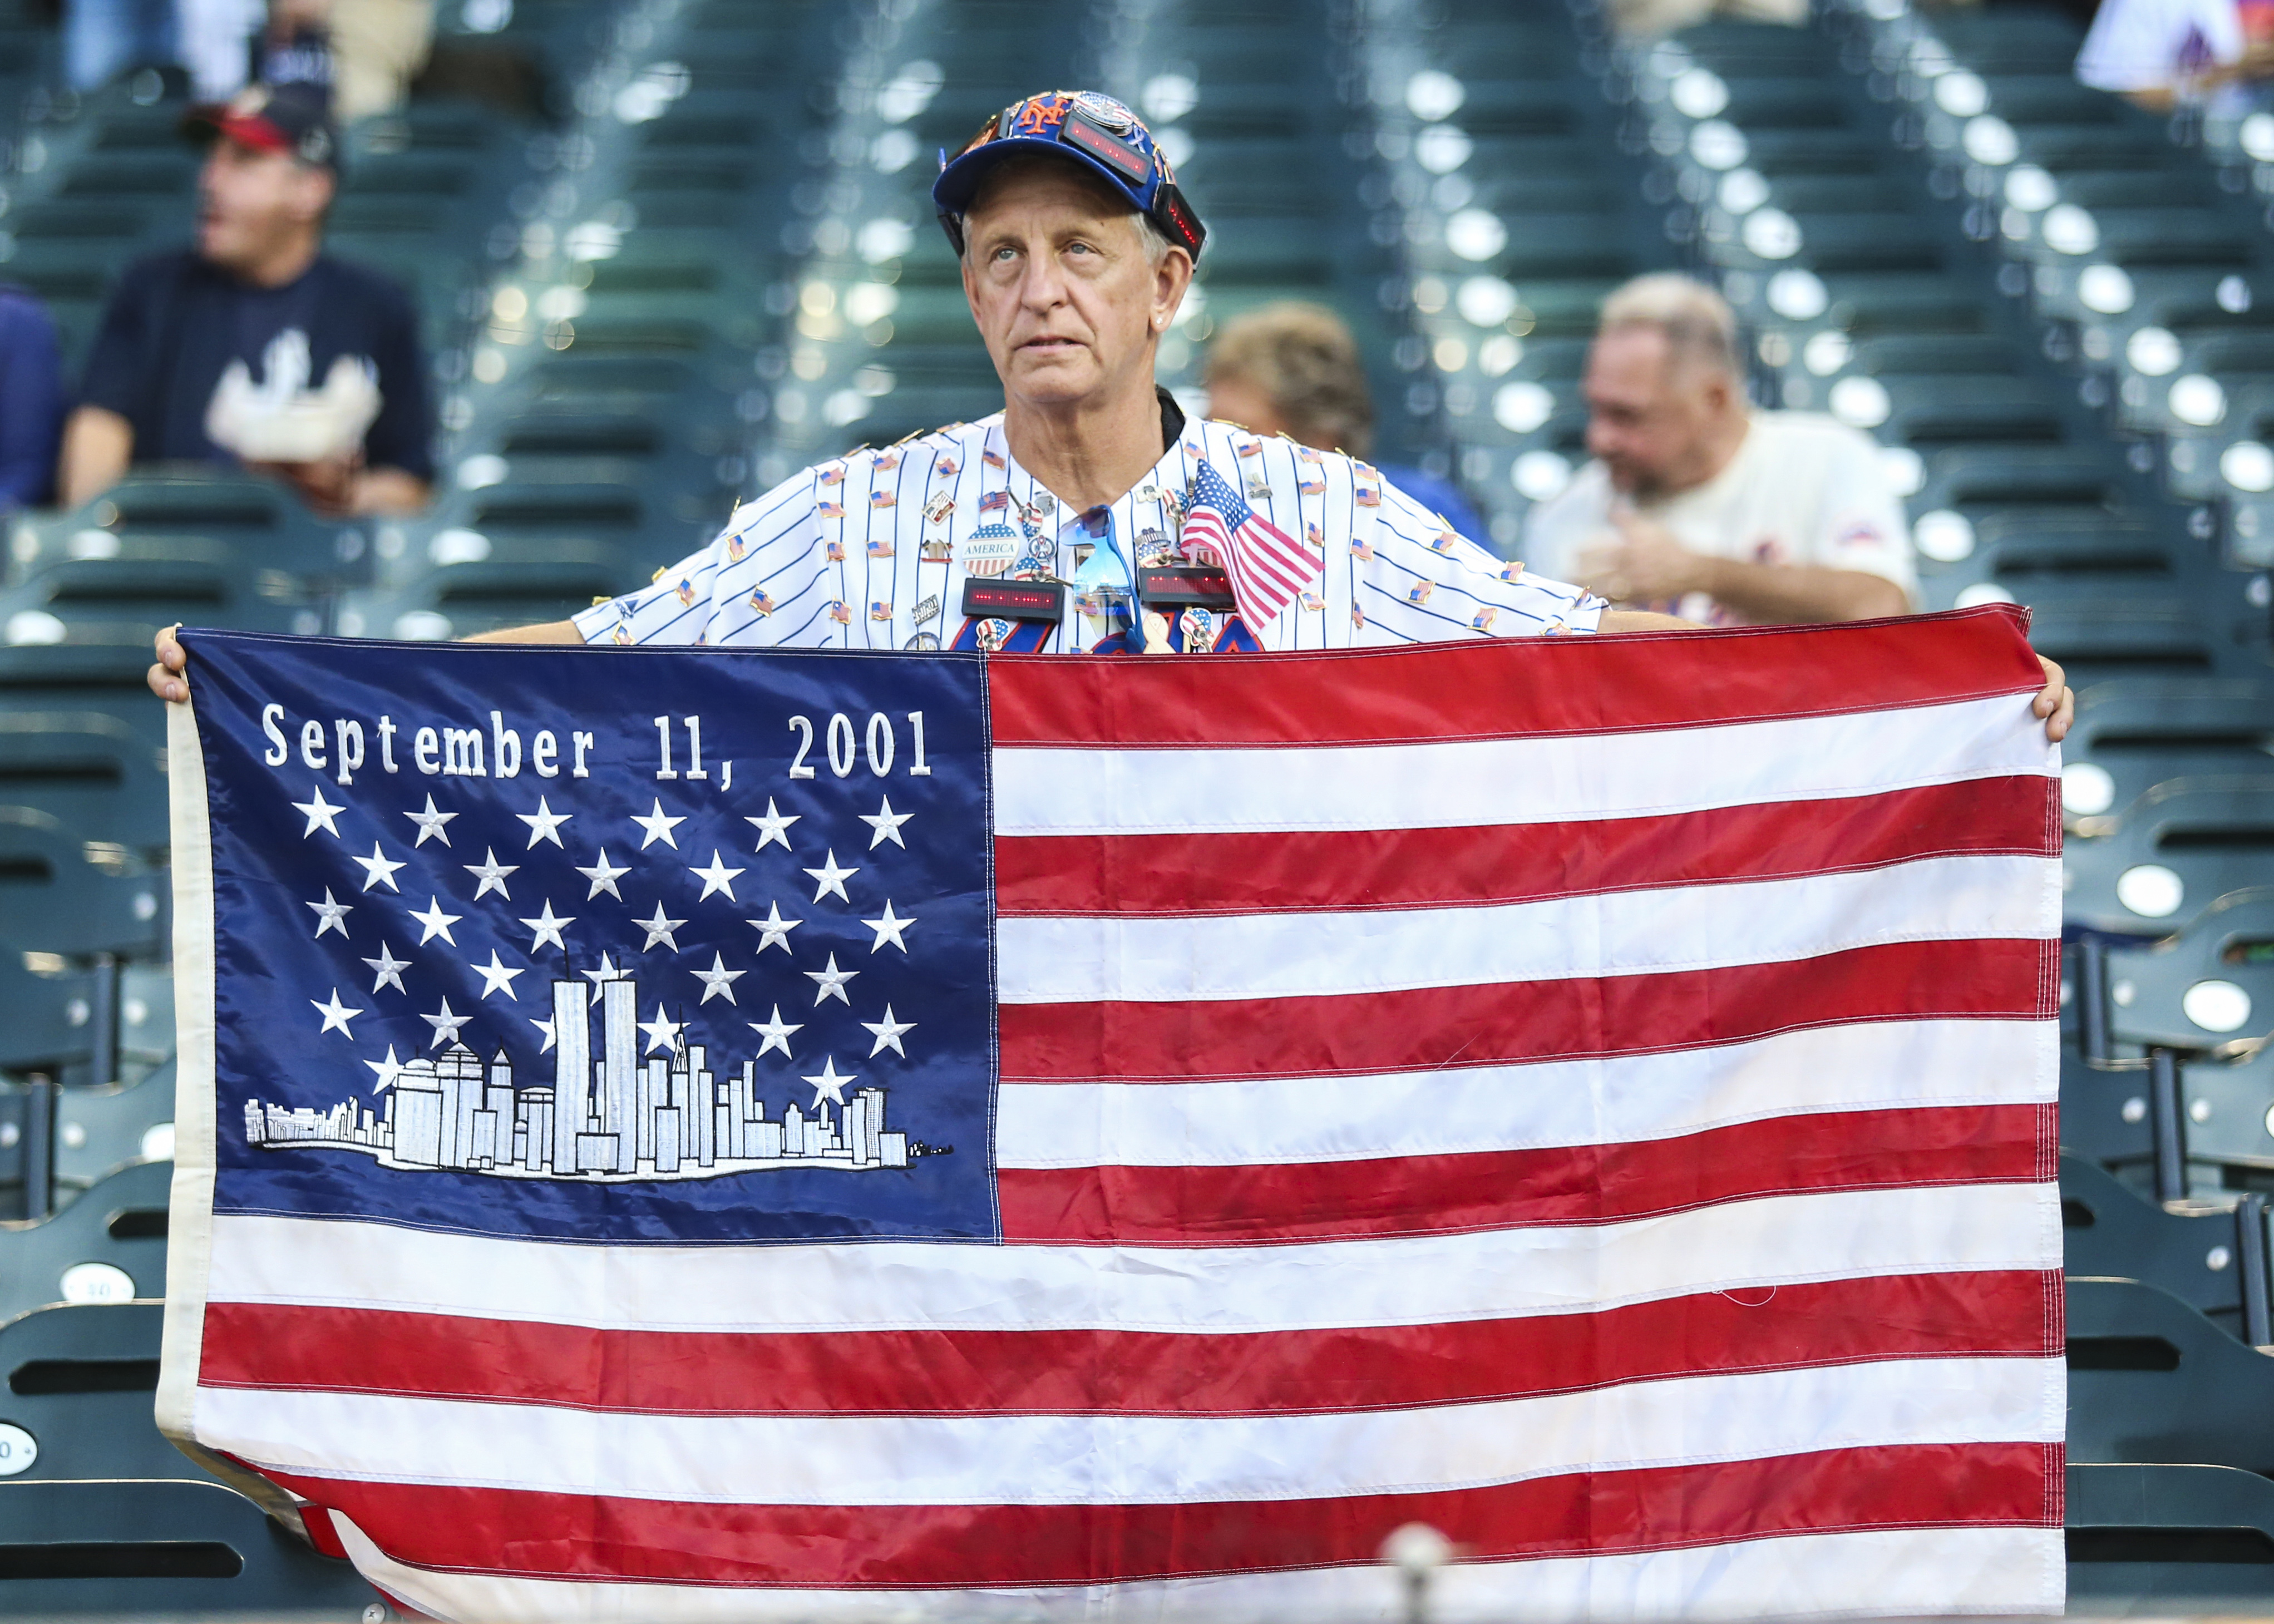 Somber Sept. 11 marked at New York Mets-Yankees matchup, US Open